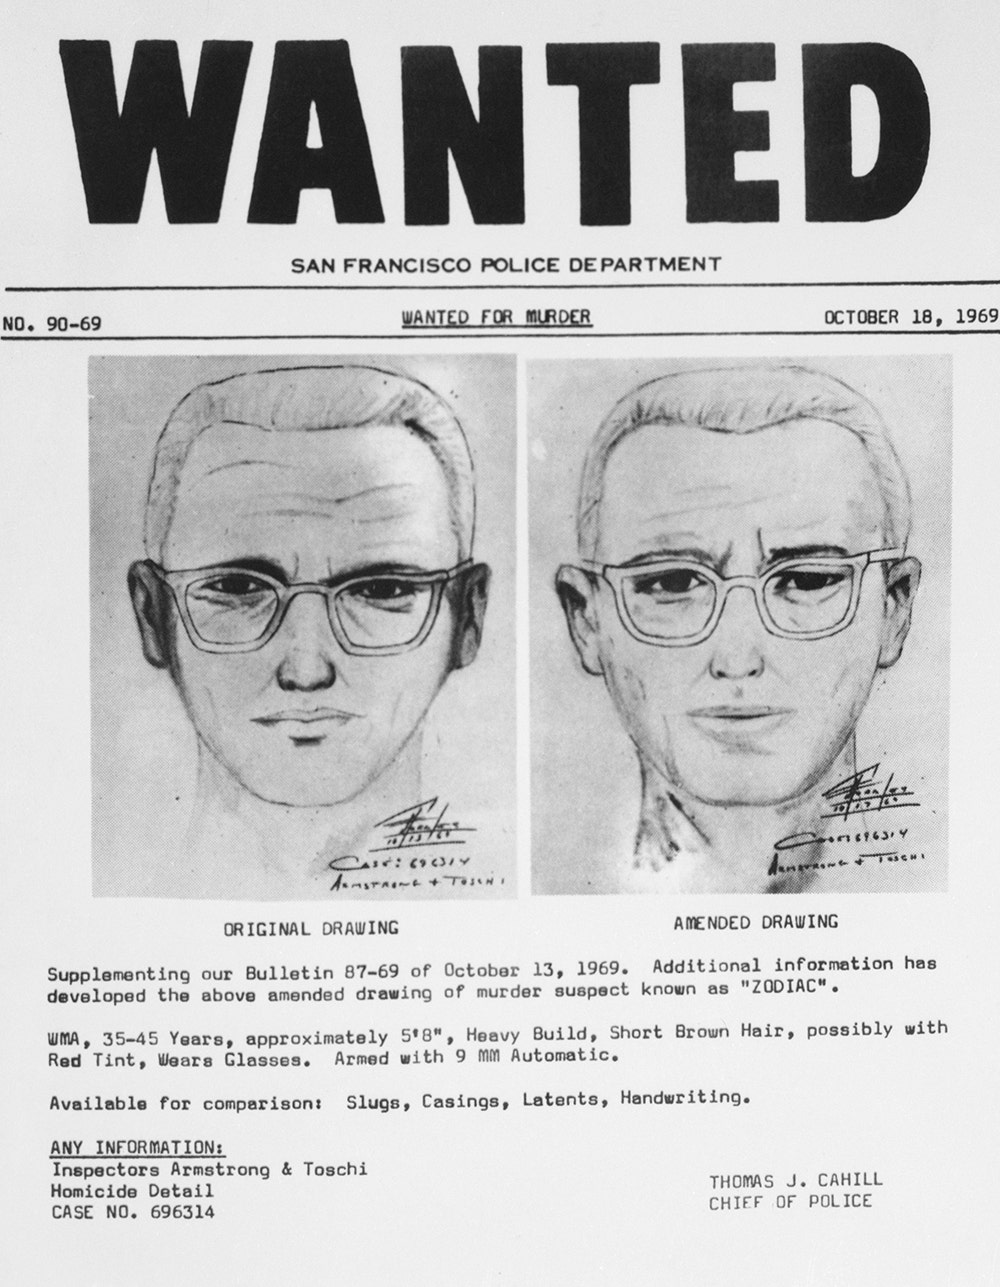 A wanted poster of the man believed to be the Zodiac killer.